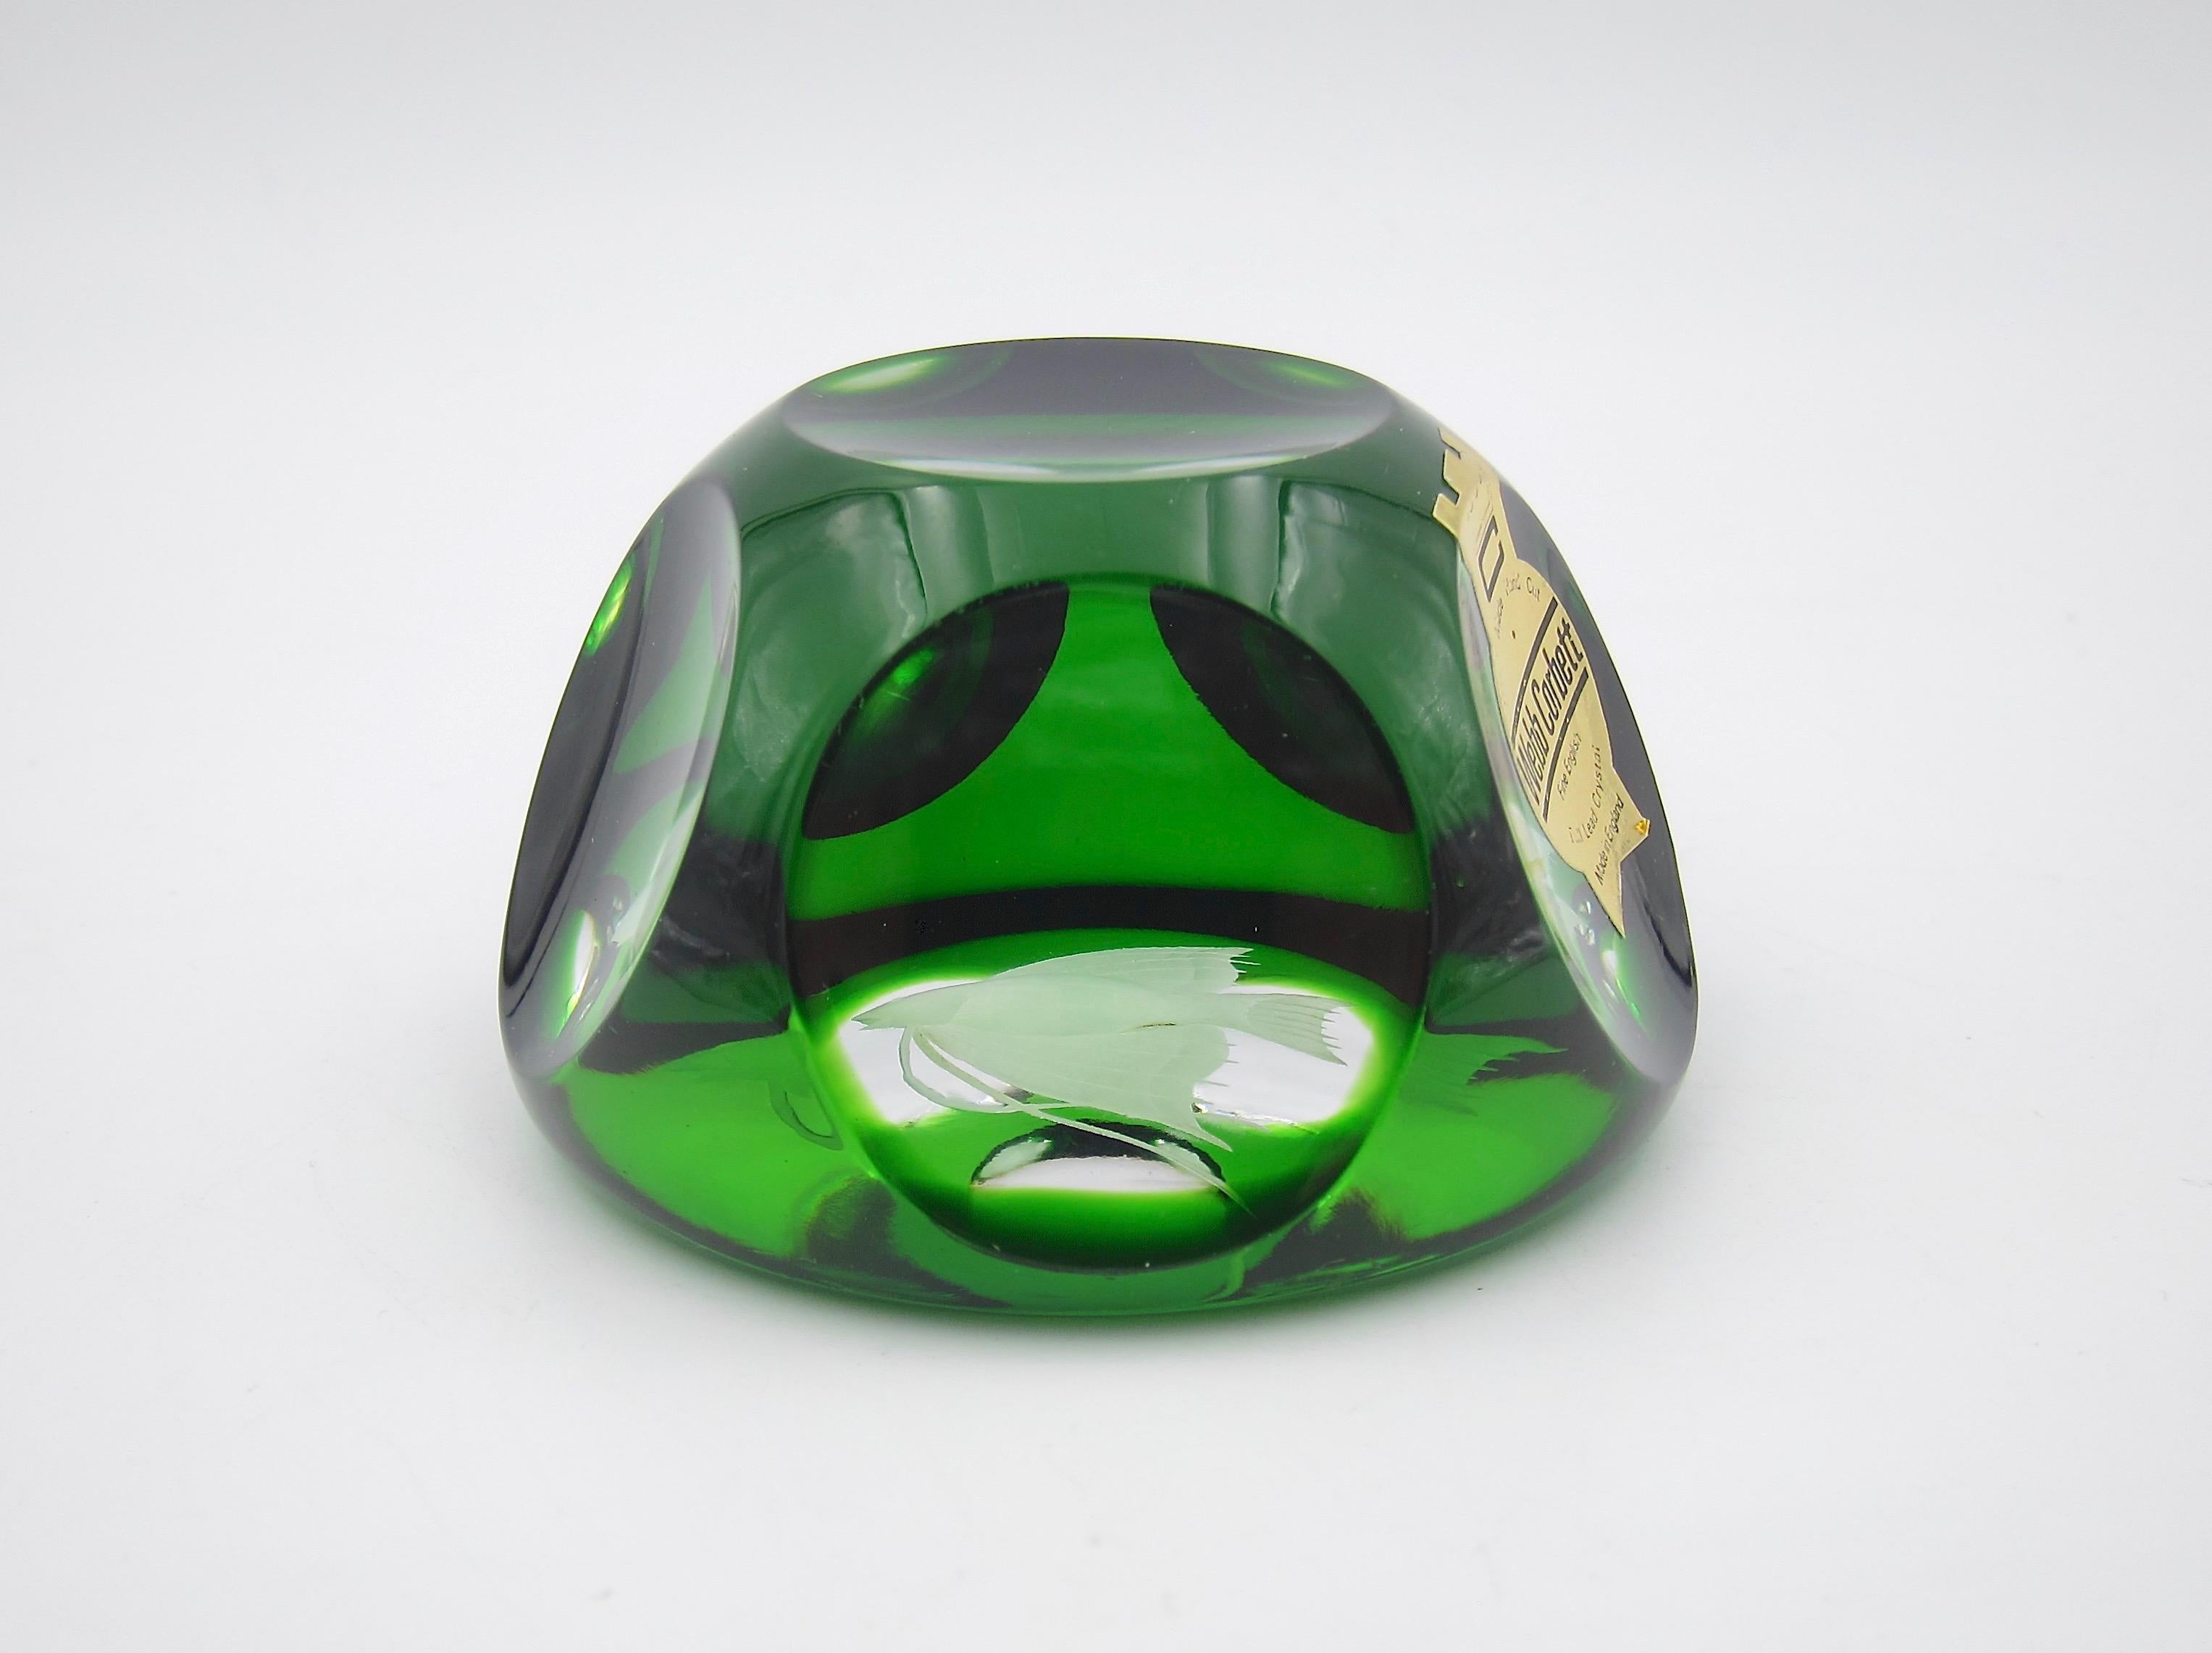 A vintage art glass paperweight from Webb Corbett (later Royal Doulton) of Great Britain, dating circa 1970s. The faceted weight is cased within a green layer of glass skillfully cut to clear. The faceting reveals an intaglio fish on the polished